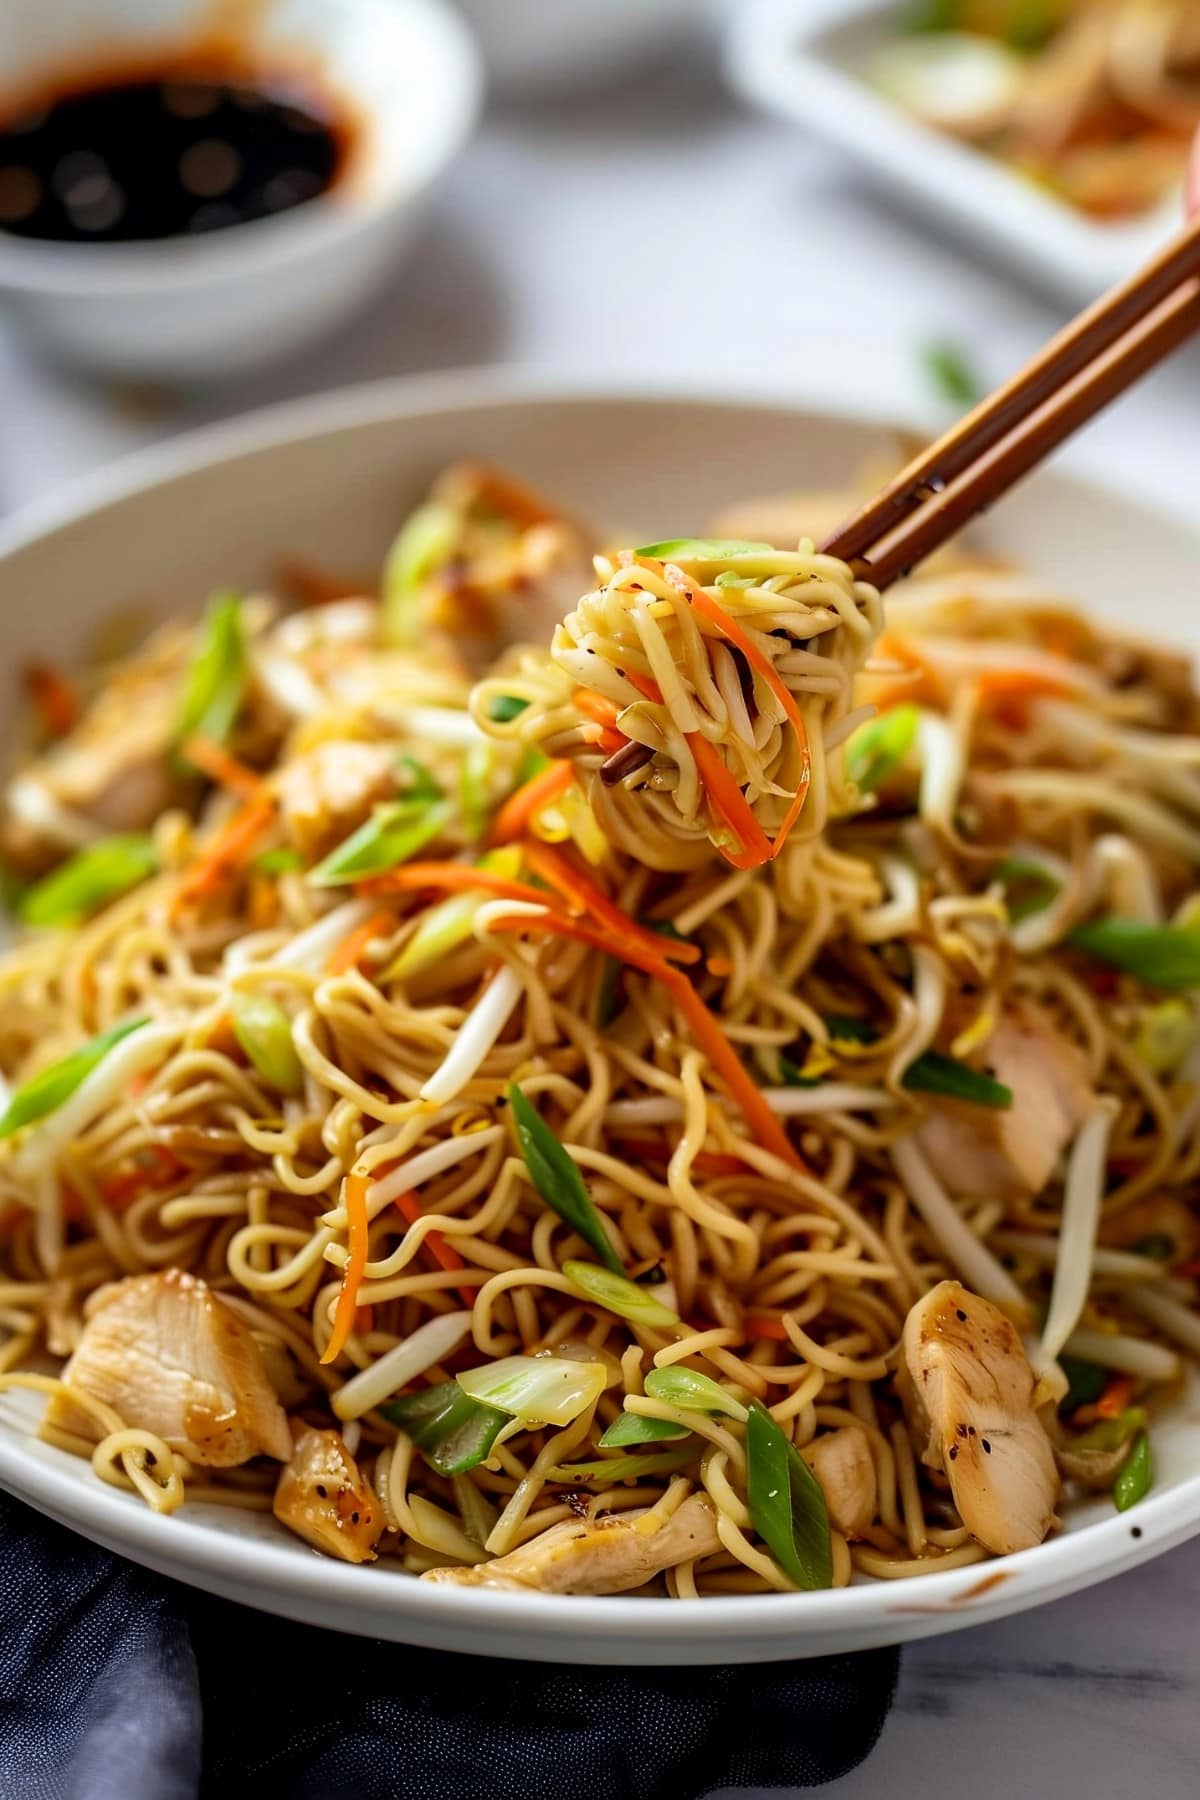 A savory plate of chicken chow mein, featuring vibrant vegetables and thin noodles